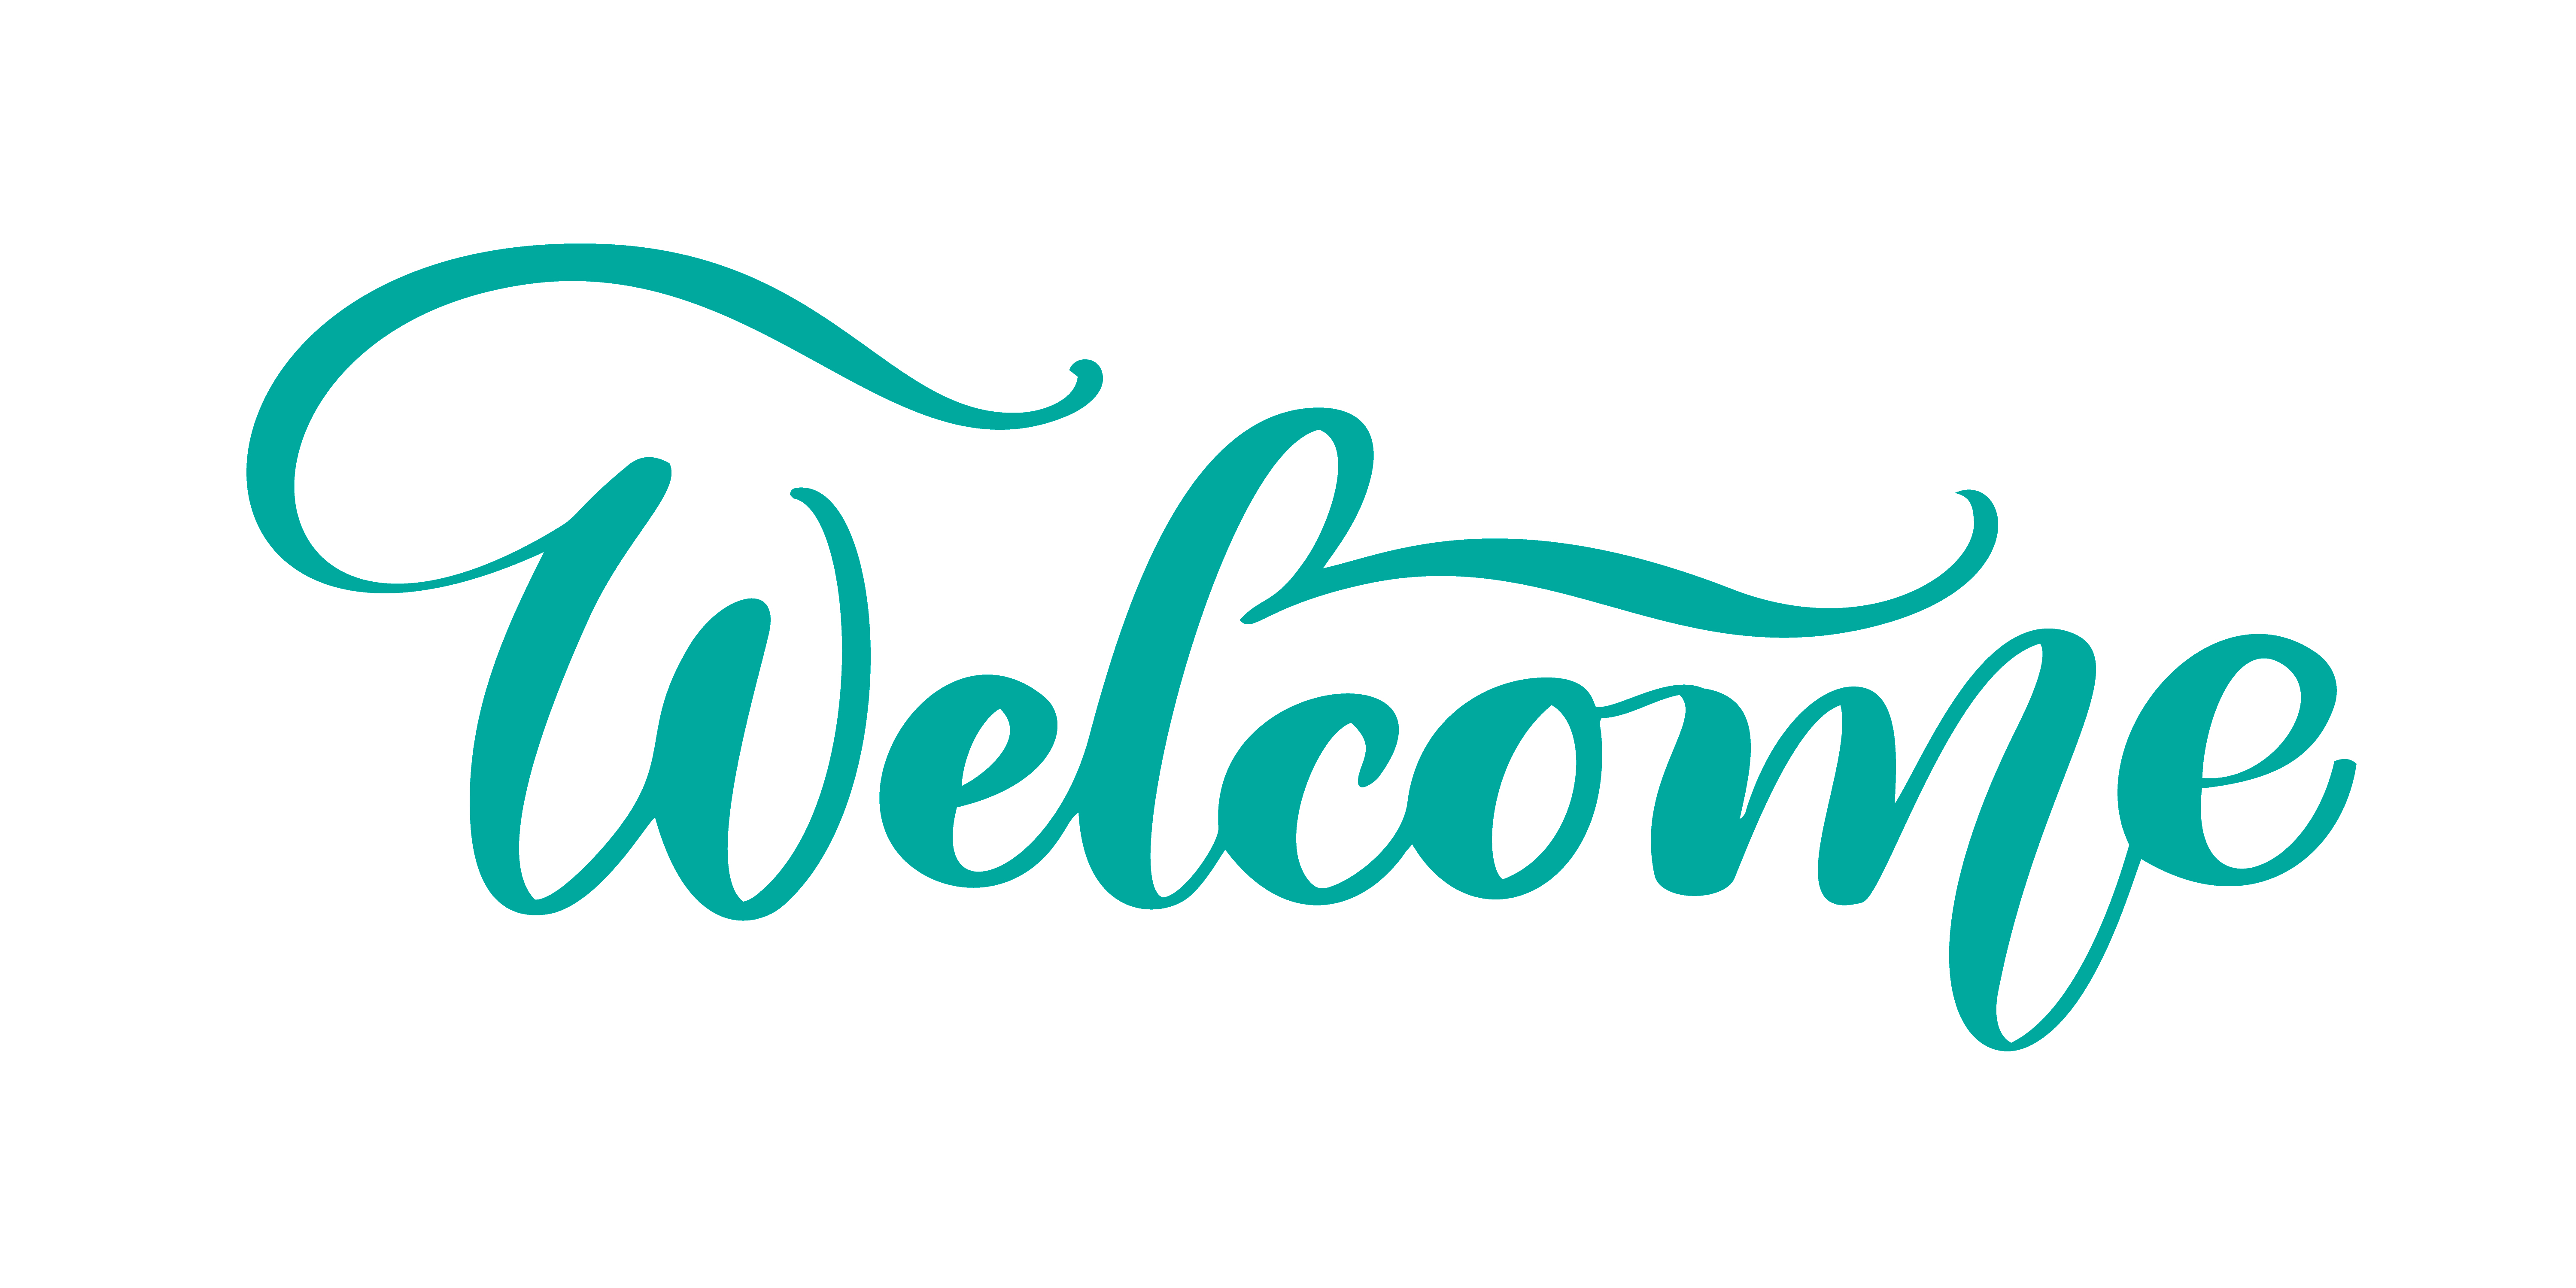 Welcome Hand drawn text. Trendy hand lettering quote, fashion graphics ...